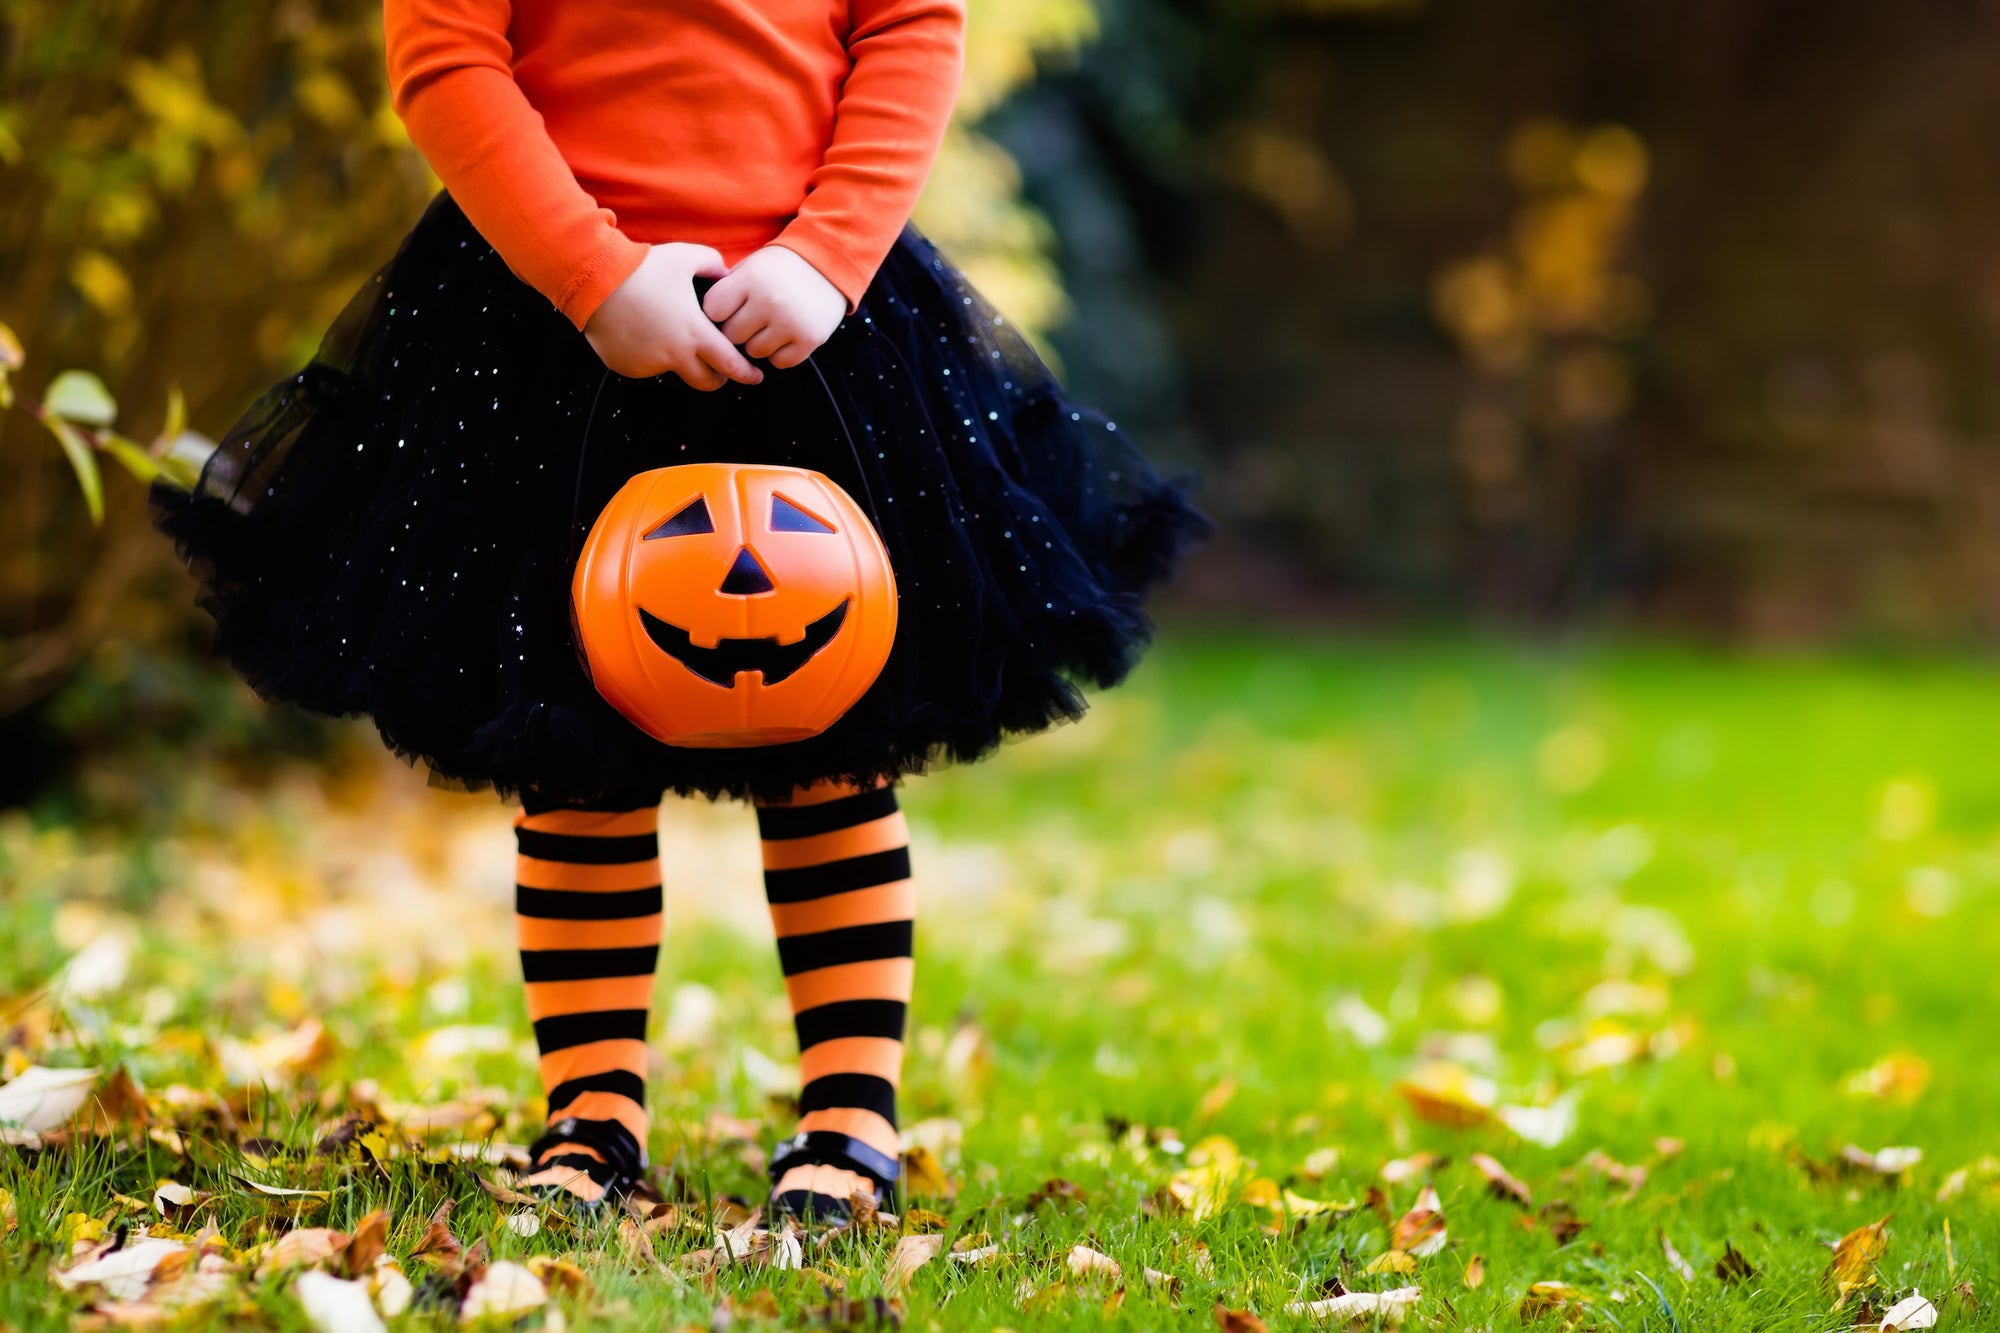 How To Keep Your Little One Safe this Halloween